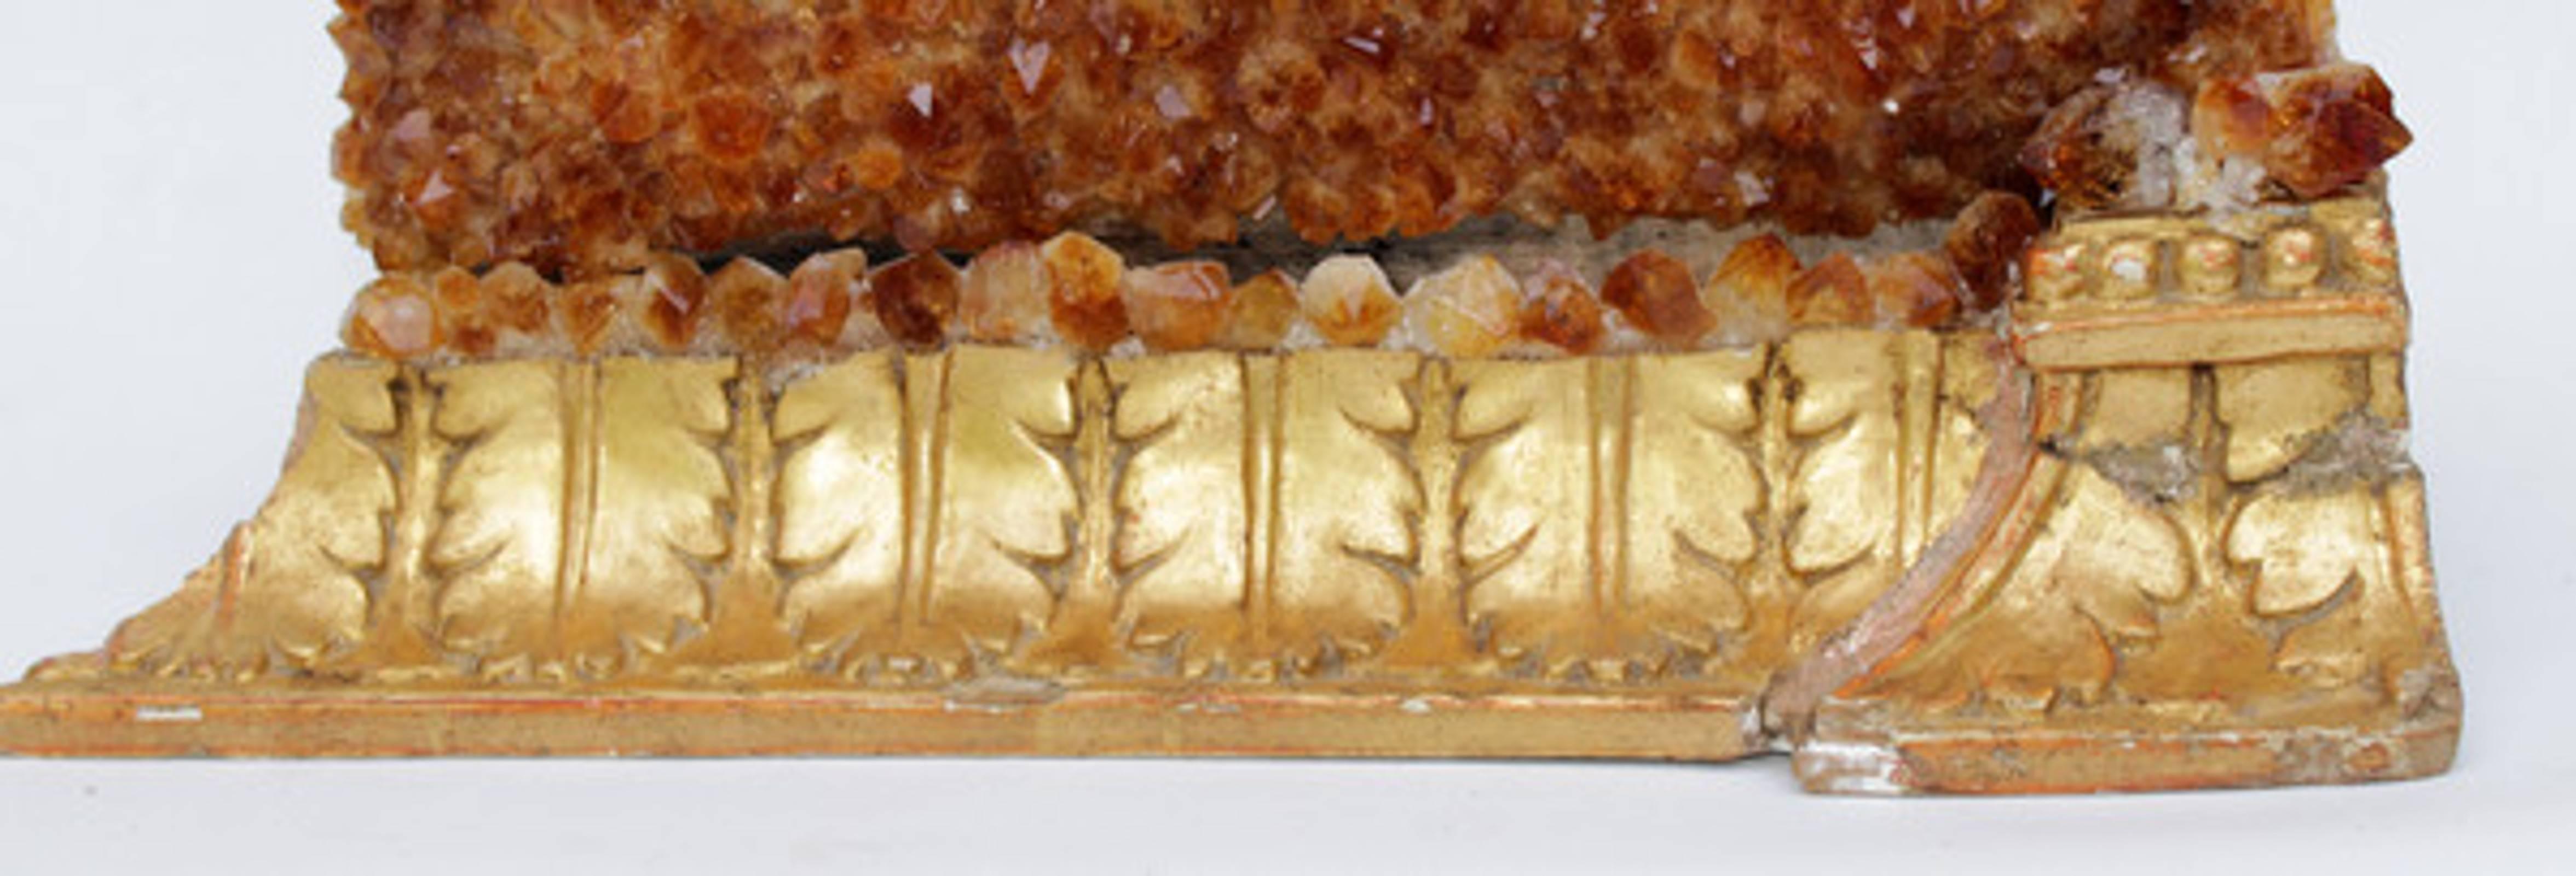 18th Century and Earlier Citrine in Matrix on Base with 18th Century Gold Leaf Molding / Art Accessory